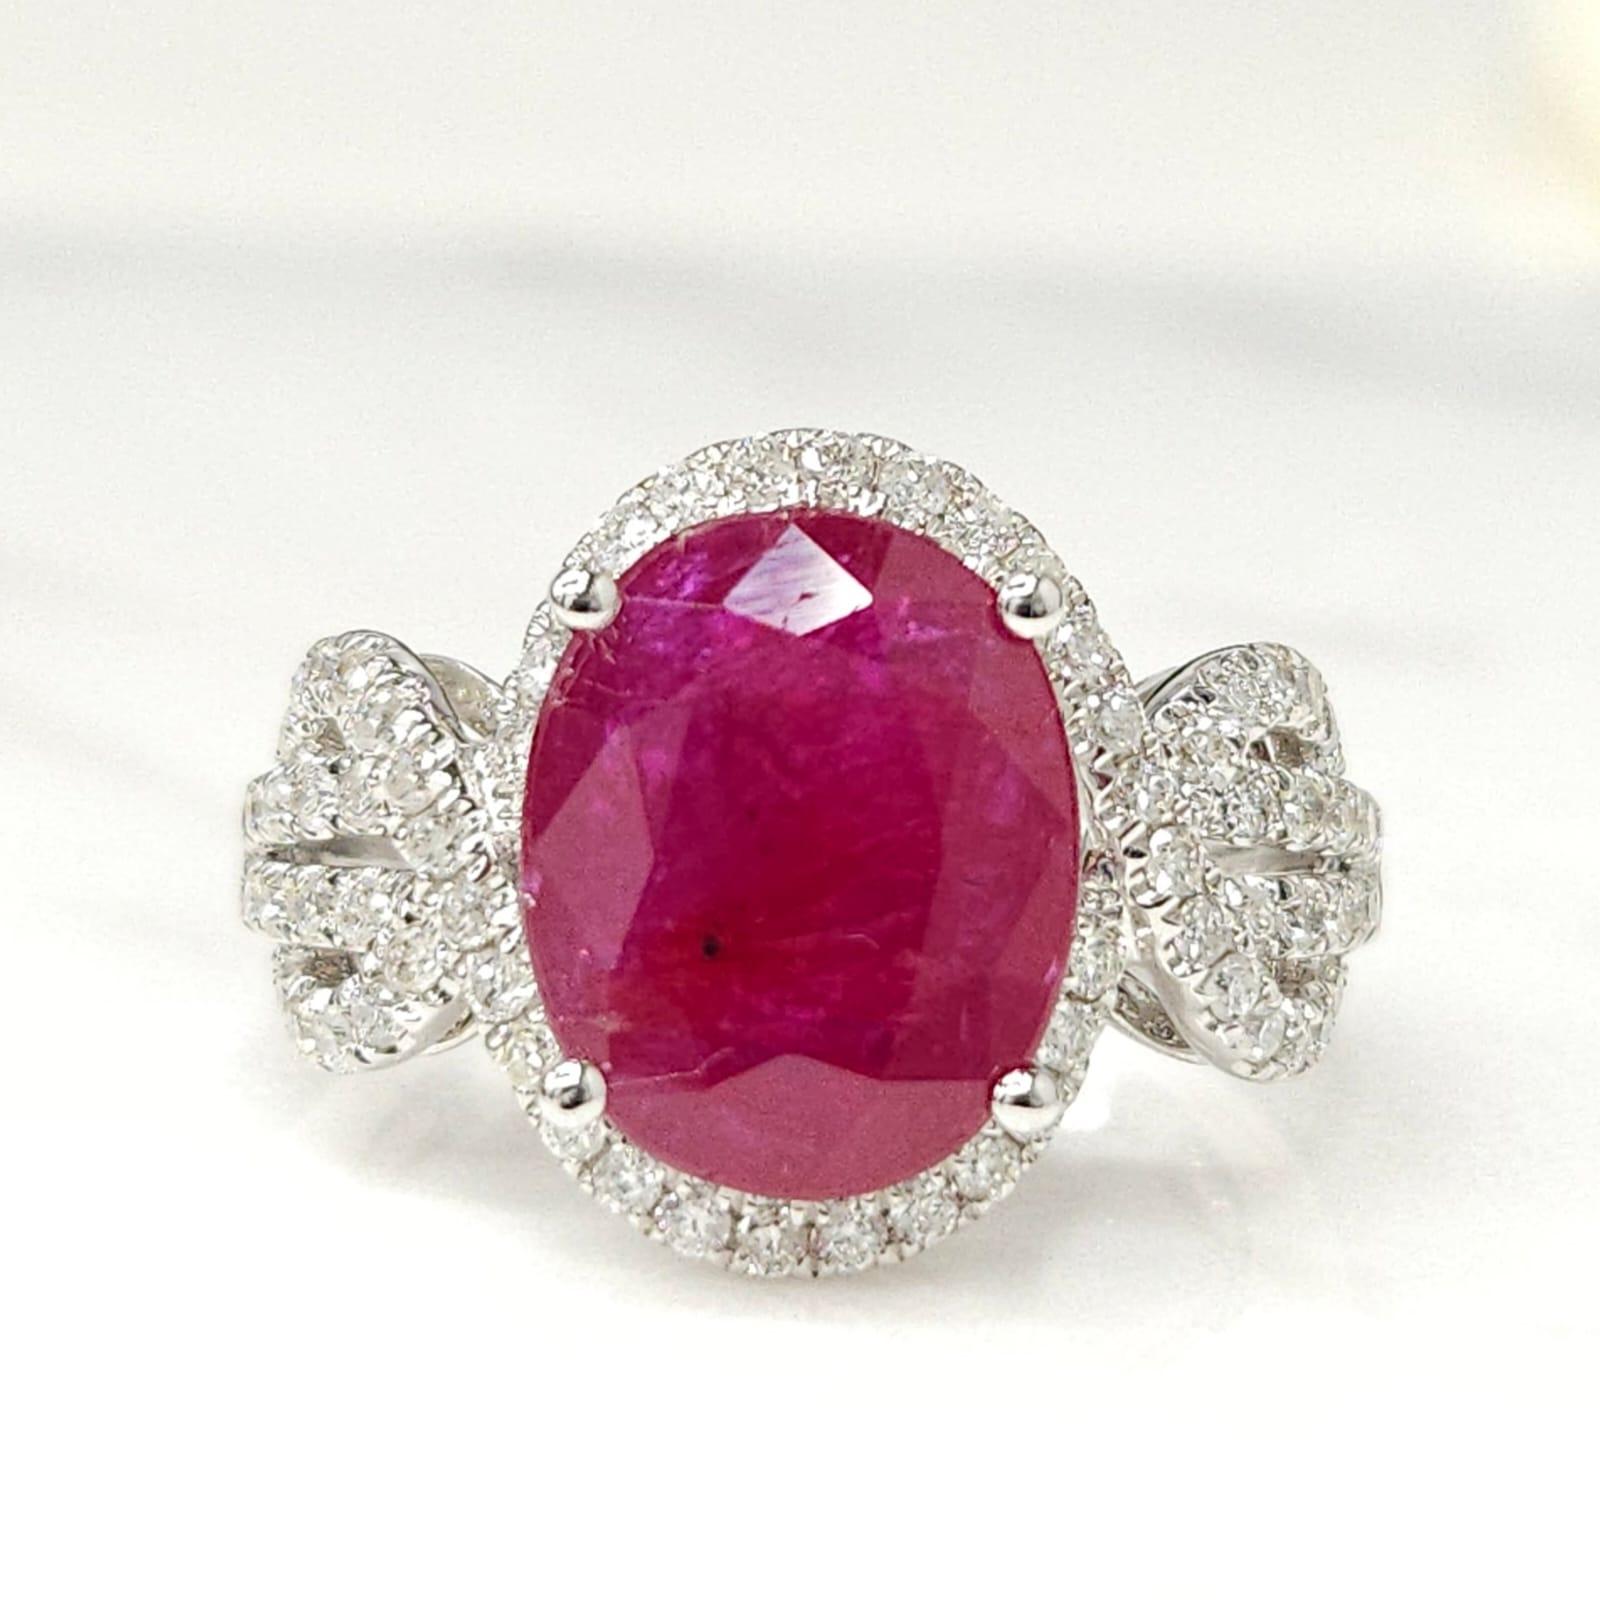 Prepare to be enchanted by this exceptional IGI Certified 4.12 Carat Ruby Ring. Crafted in luxurious 18K white gold, this exquisite ring showcases an oval-shaped Ruby of intense deep purplish-red hue, radiating elegance and allure.

The focal point